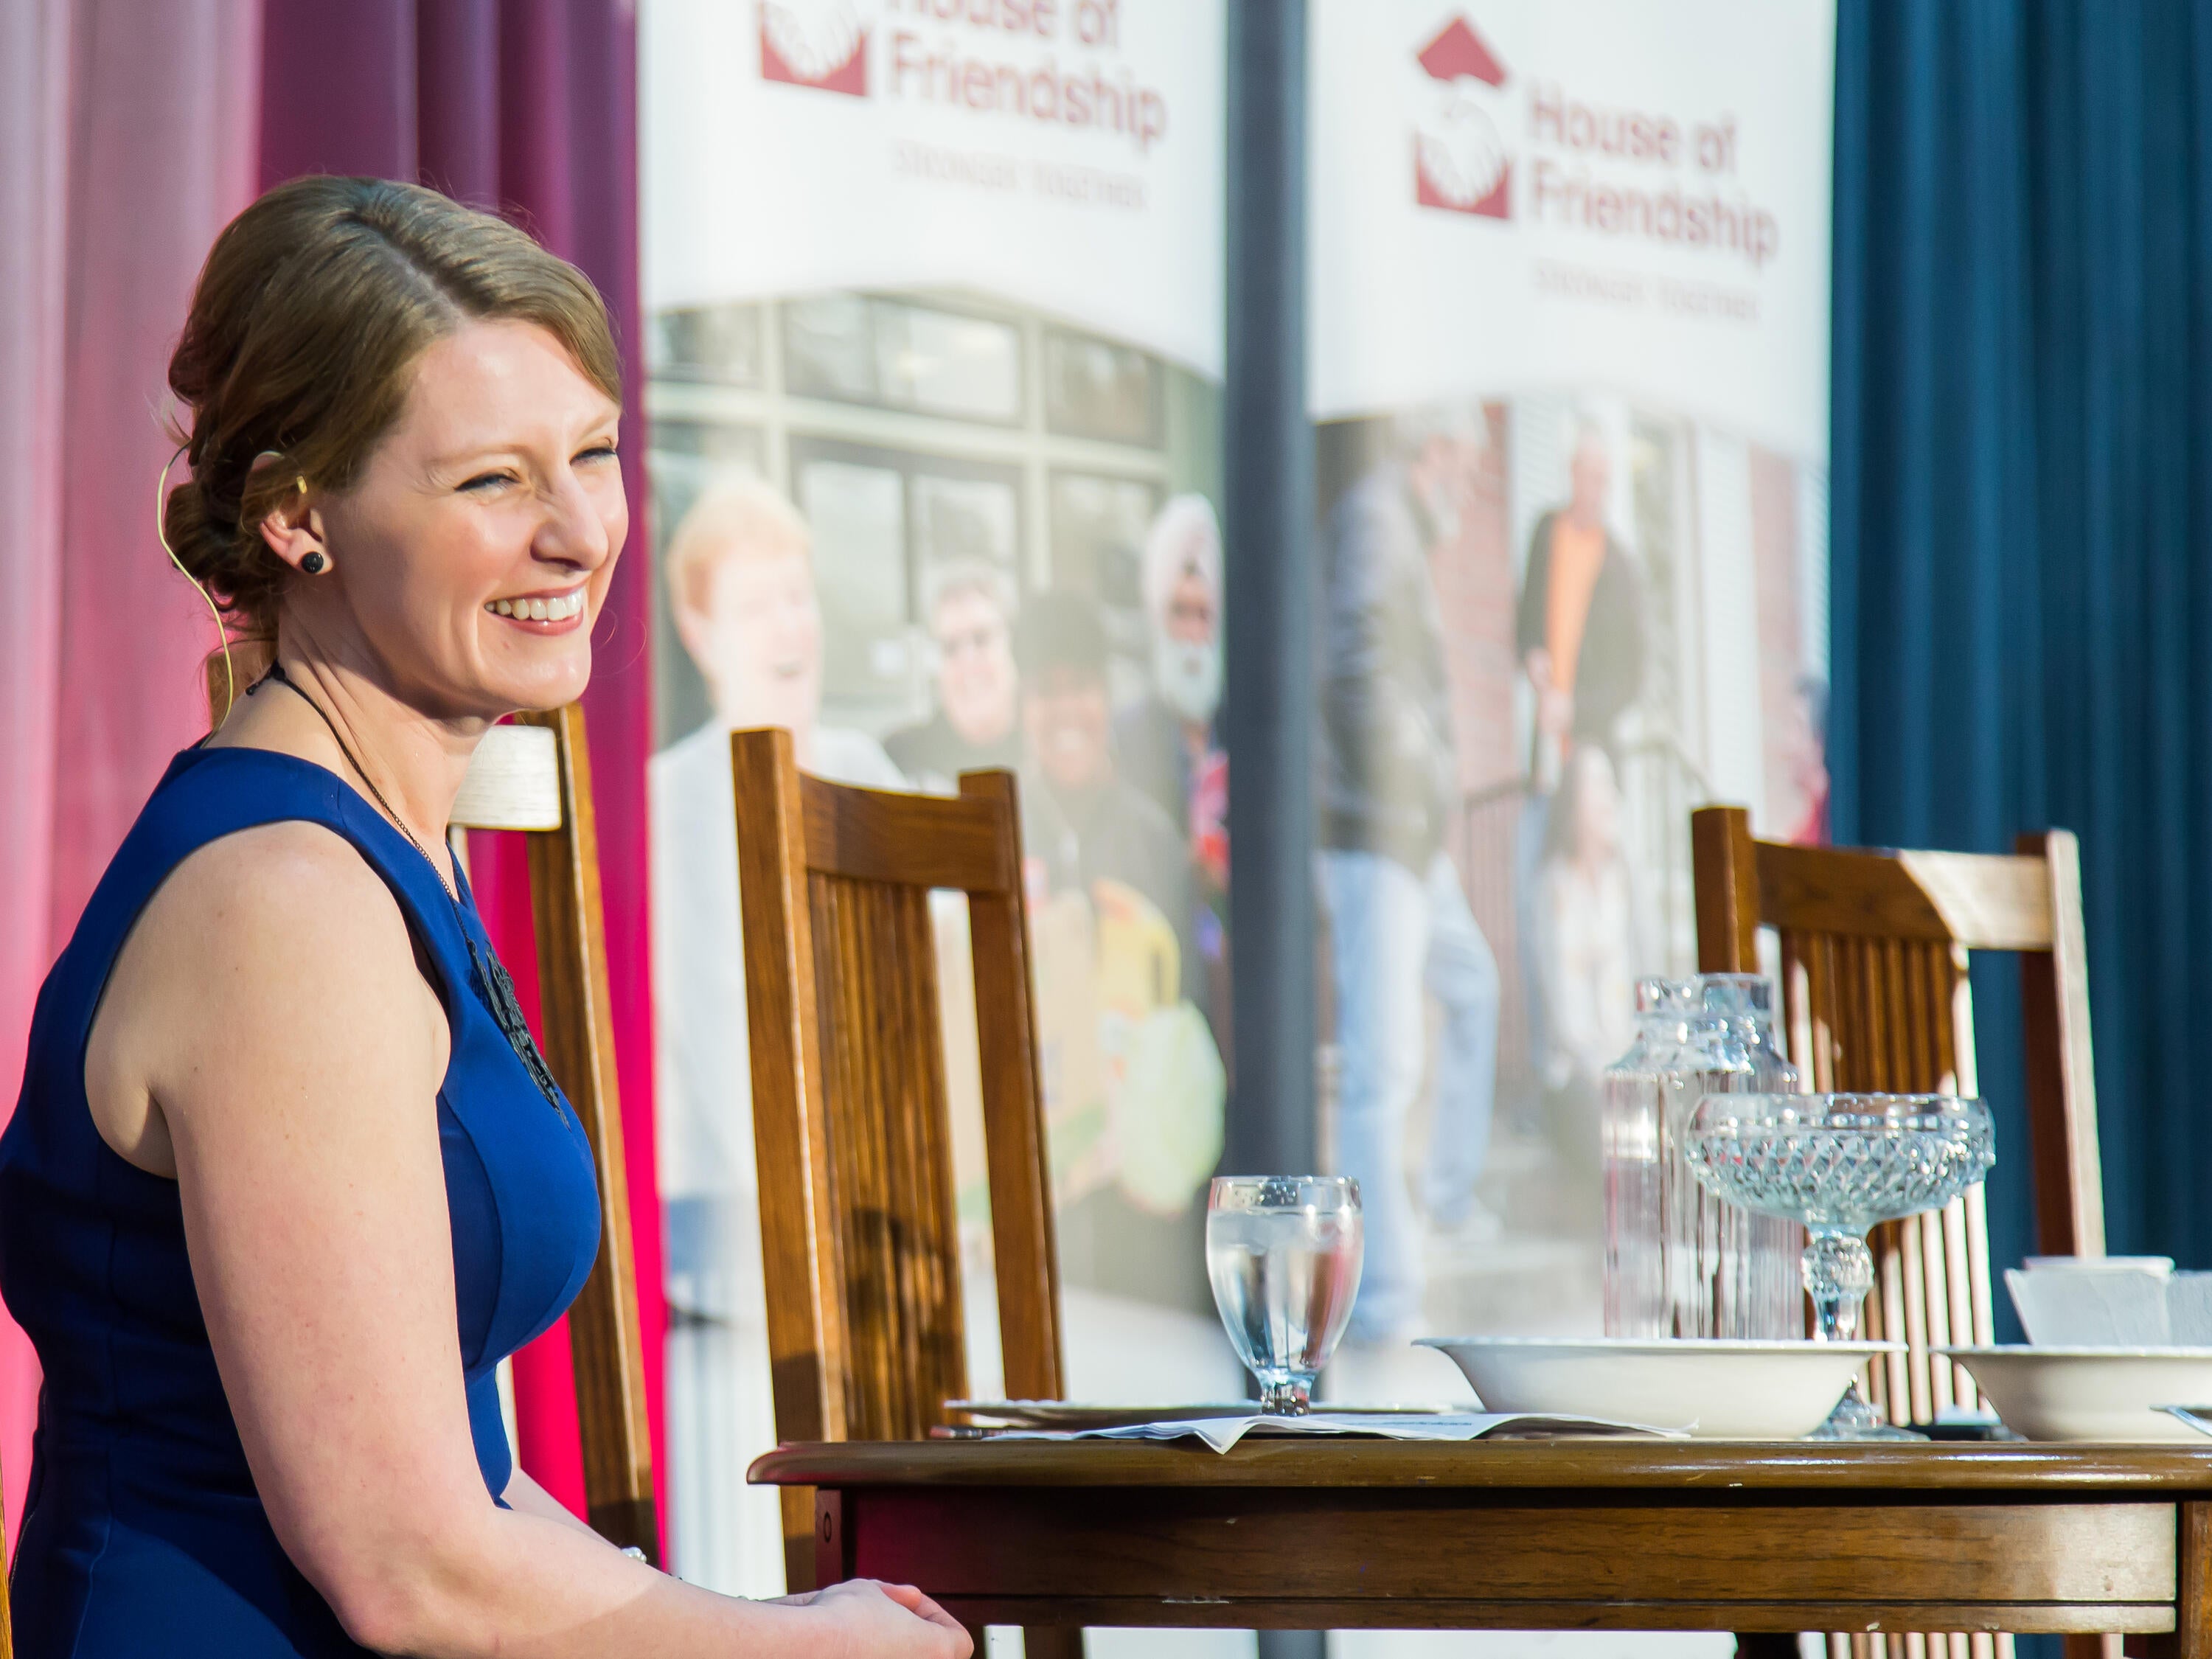 Jessica Bondy smiling while sitting next to a table at an event